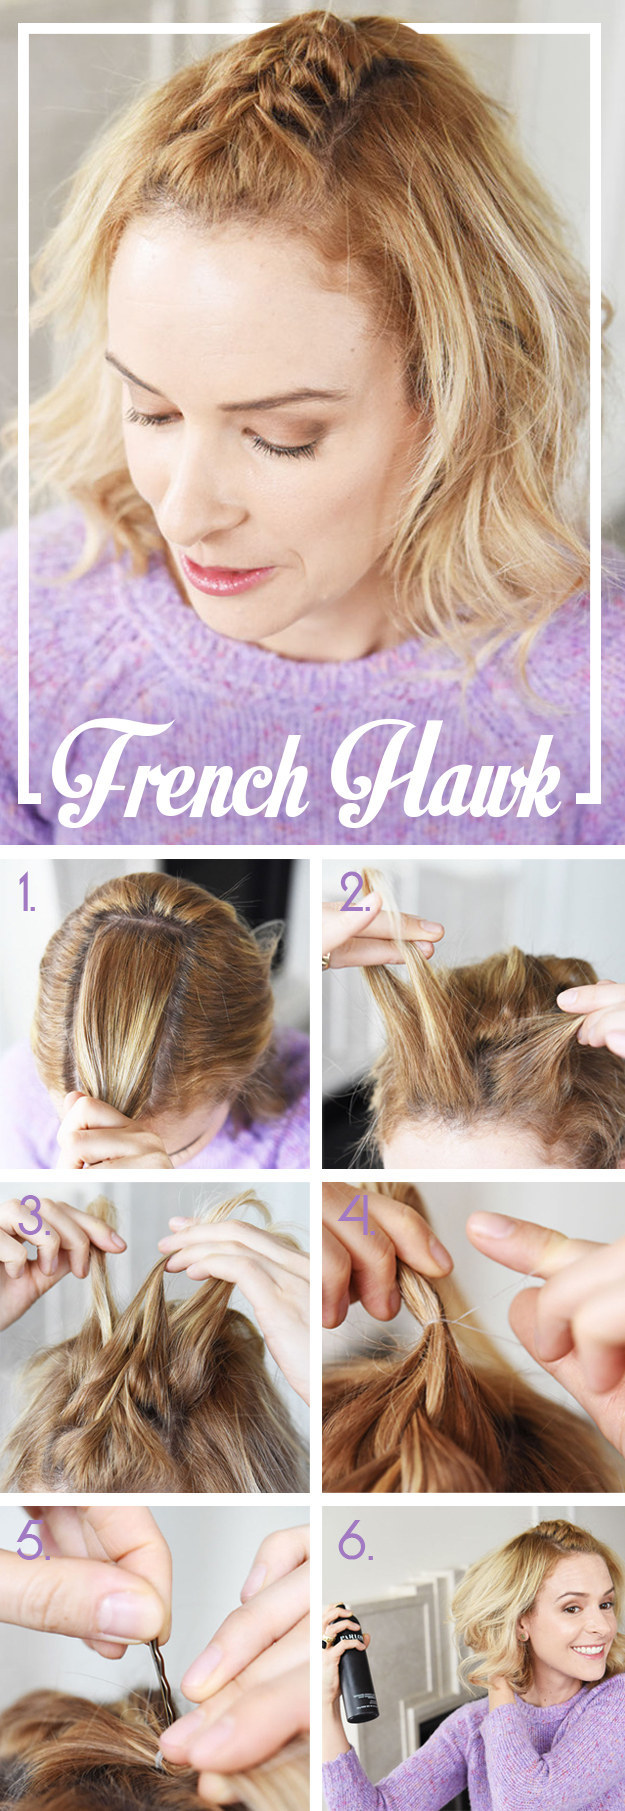 26 Incredible Hairstyles You Can Learn In 10 Steps Or Less